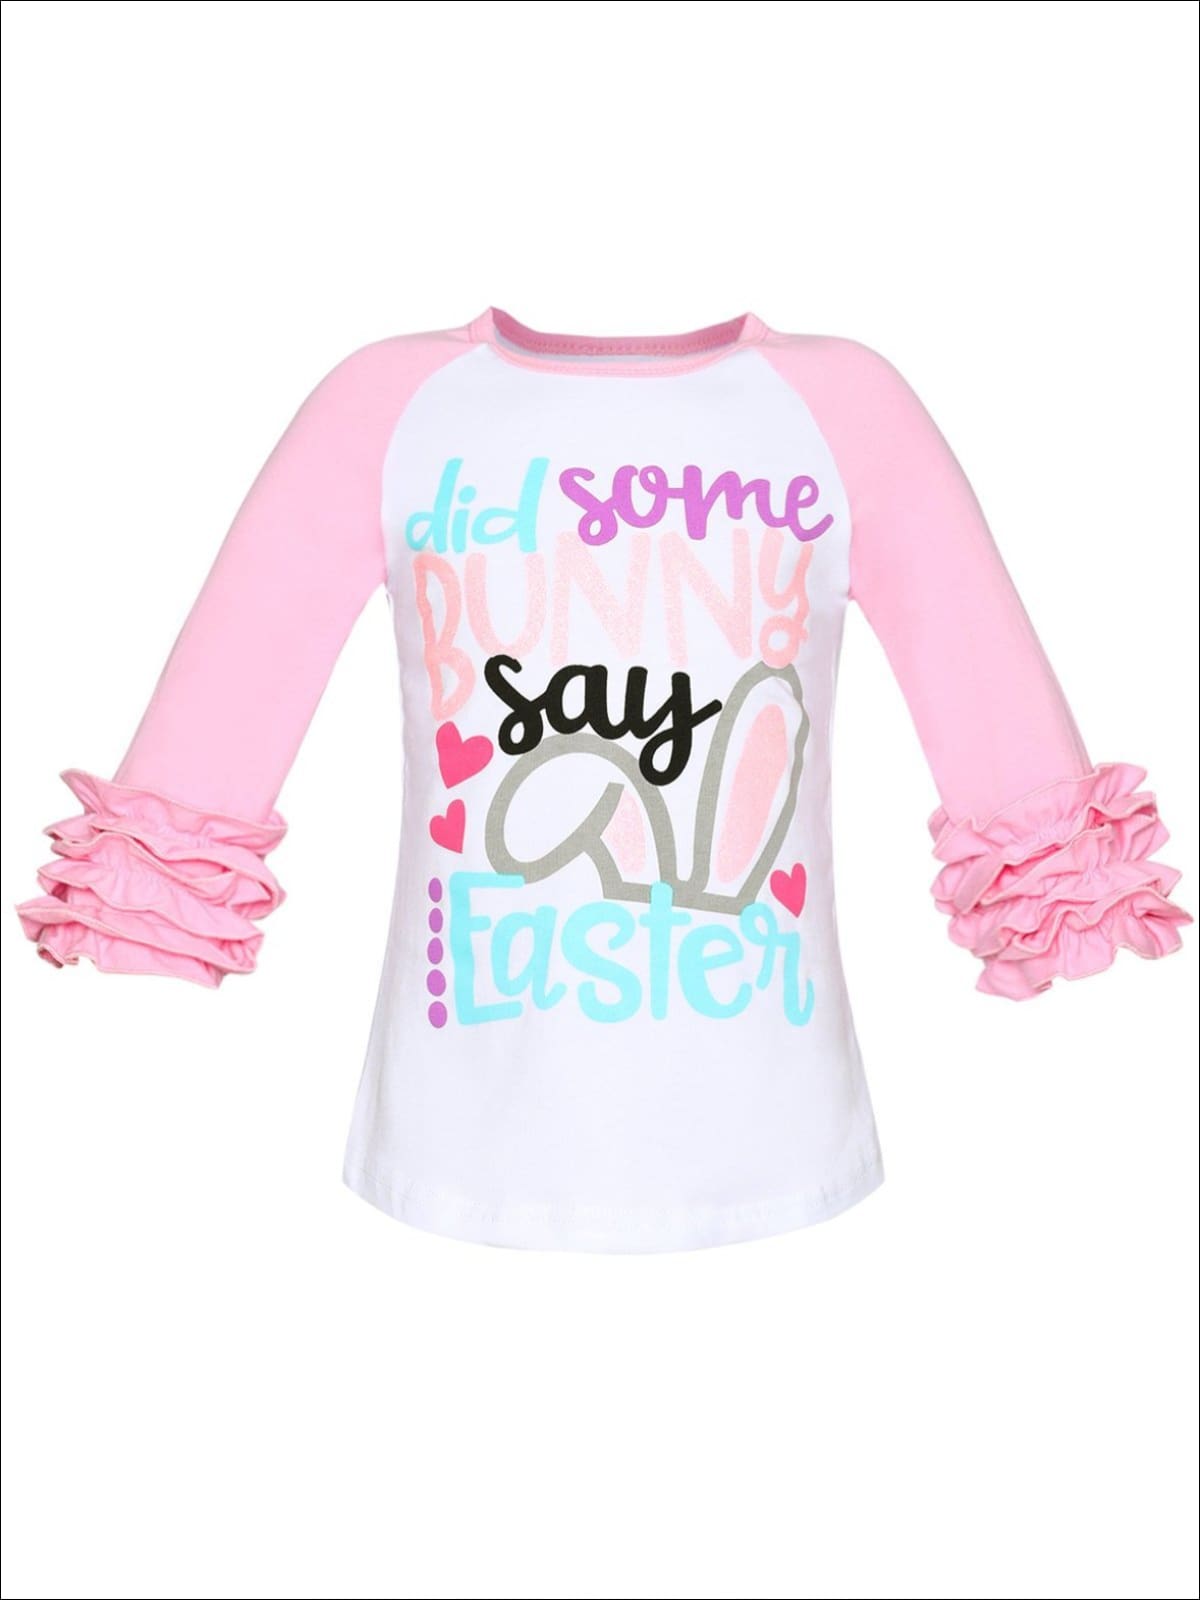 Girls Easter Themed Did Some Bunny Say Easter Long Raglan Sleeve Ruffled Top - Pink / XS-2T - Girls Spring Top